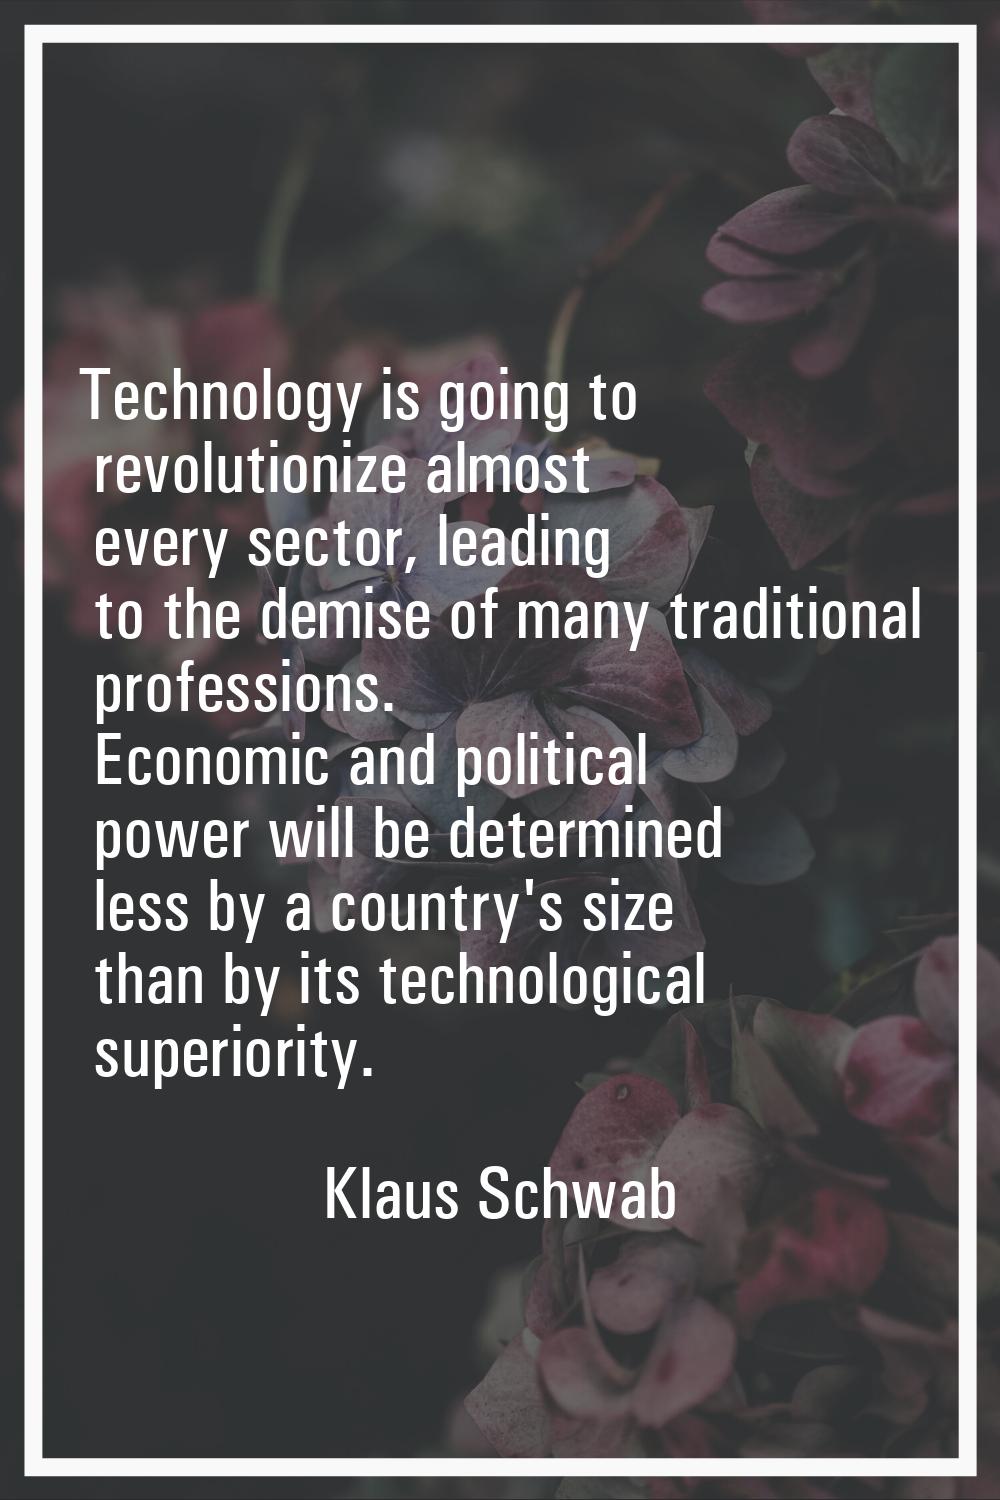 Technology is going to revolutionize almost every sector, leading to the demise of many traditional